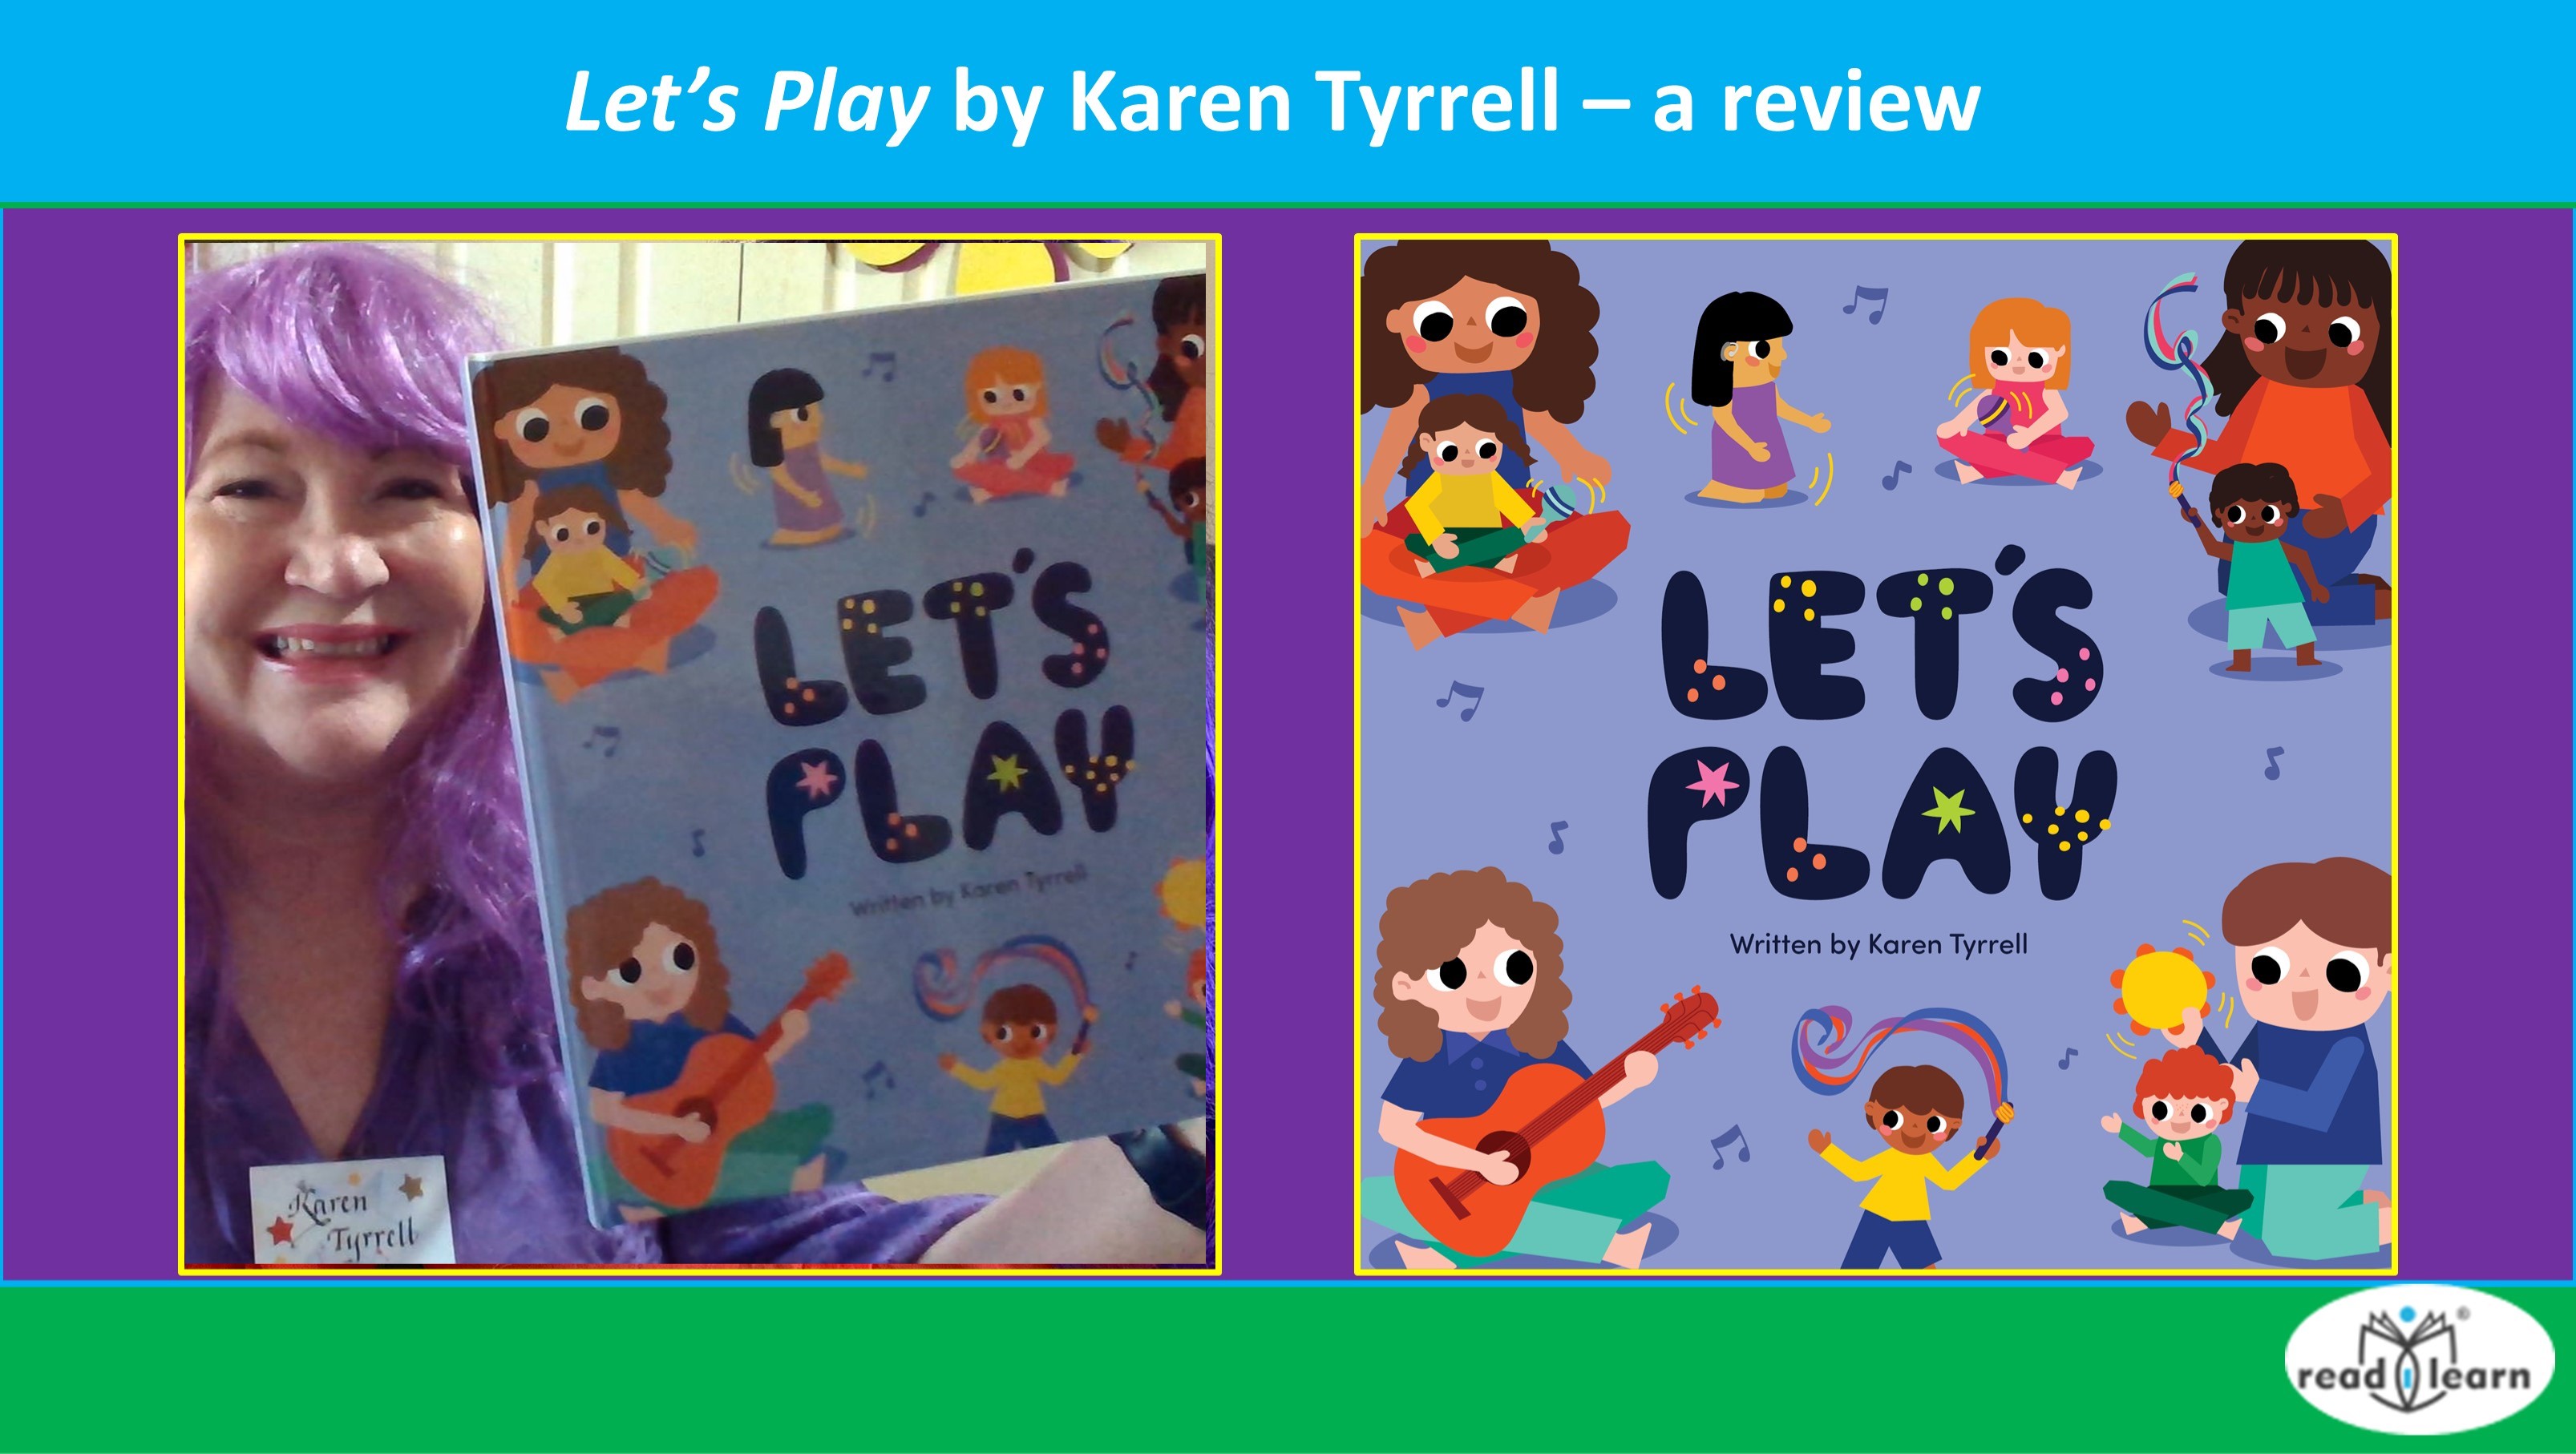 Let’s Play by Karen Tyrrell – a review – #readilearn